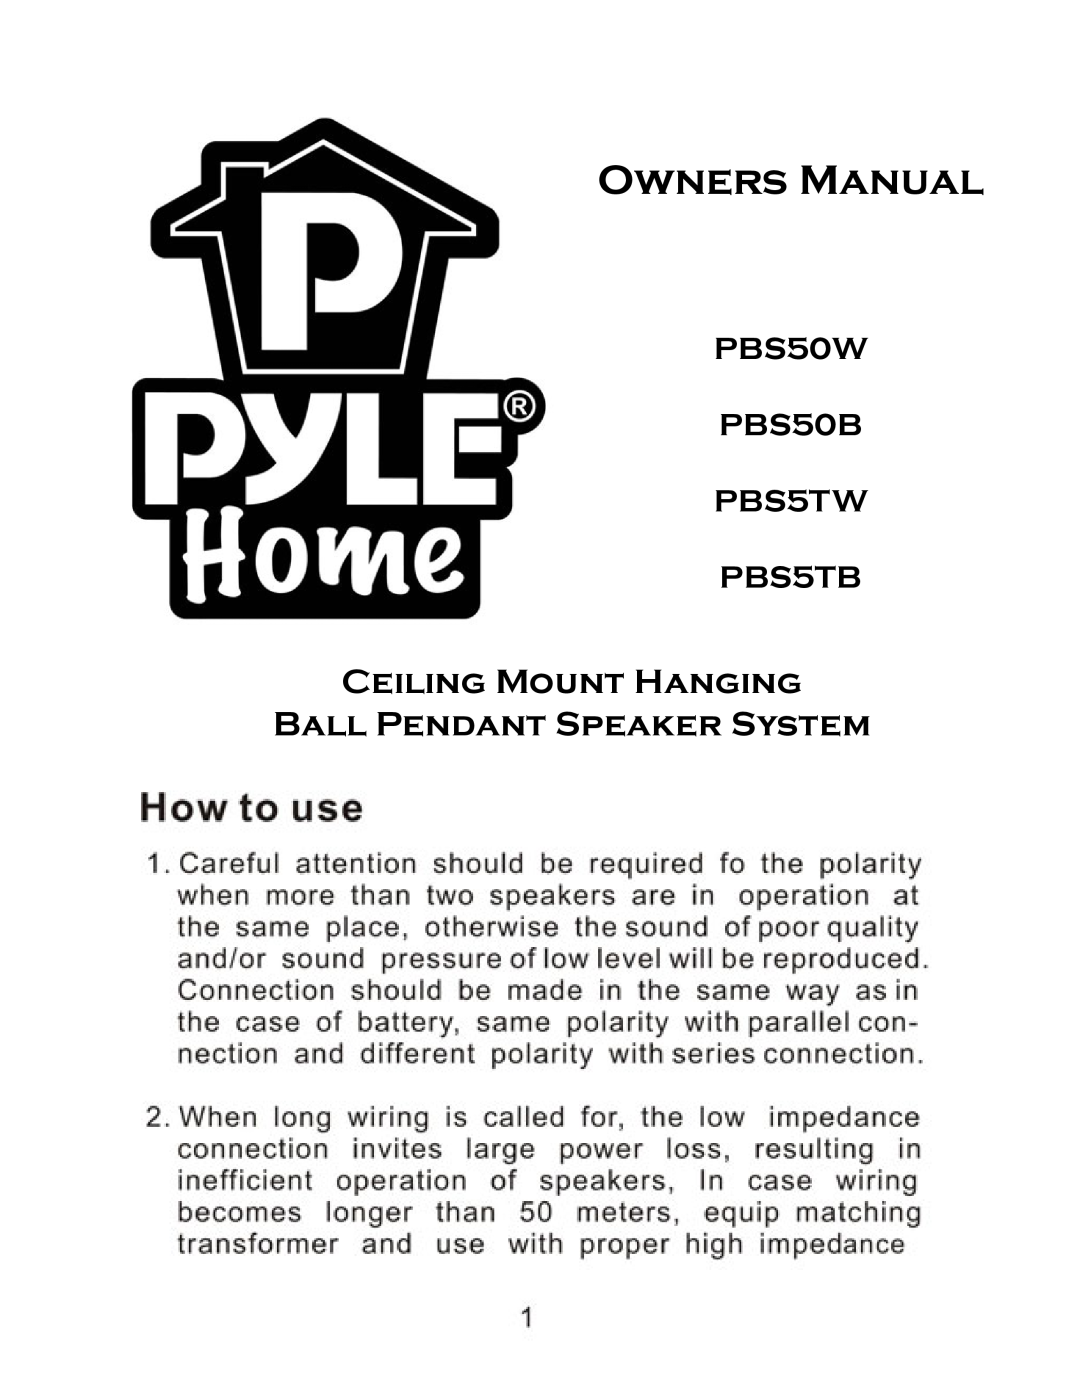 PYLE Audio owner manual Ceiling Mount Hanging Ball Pendant Speaker System, PBS50W PBS50B PBS5TW PBS5TB 